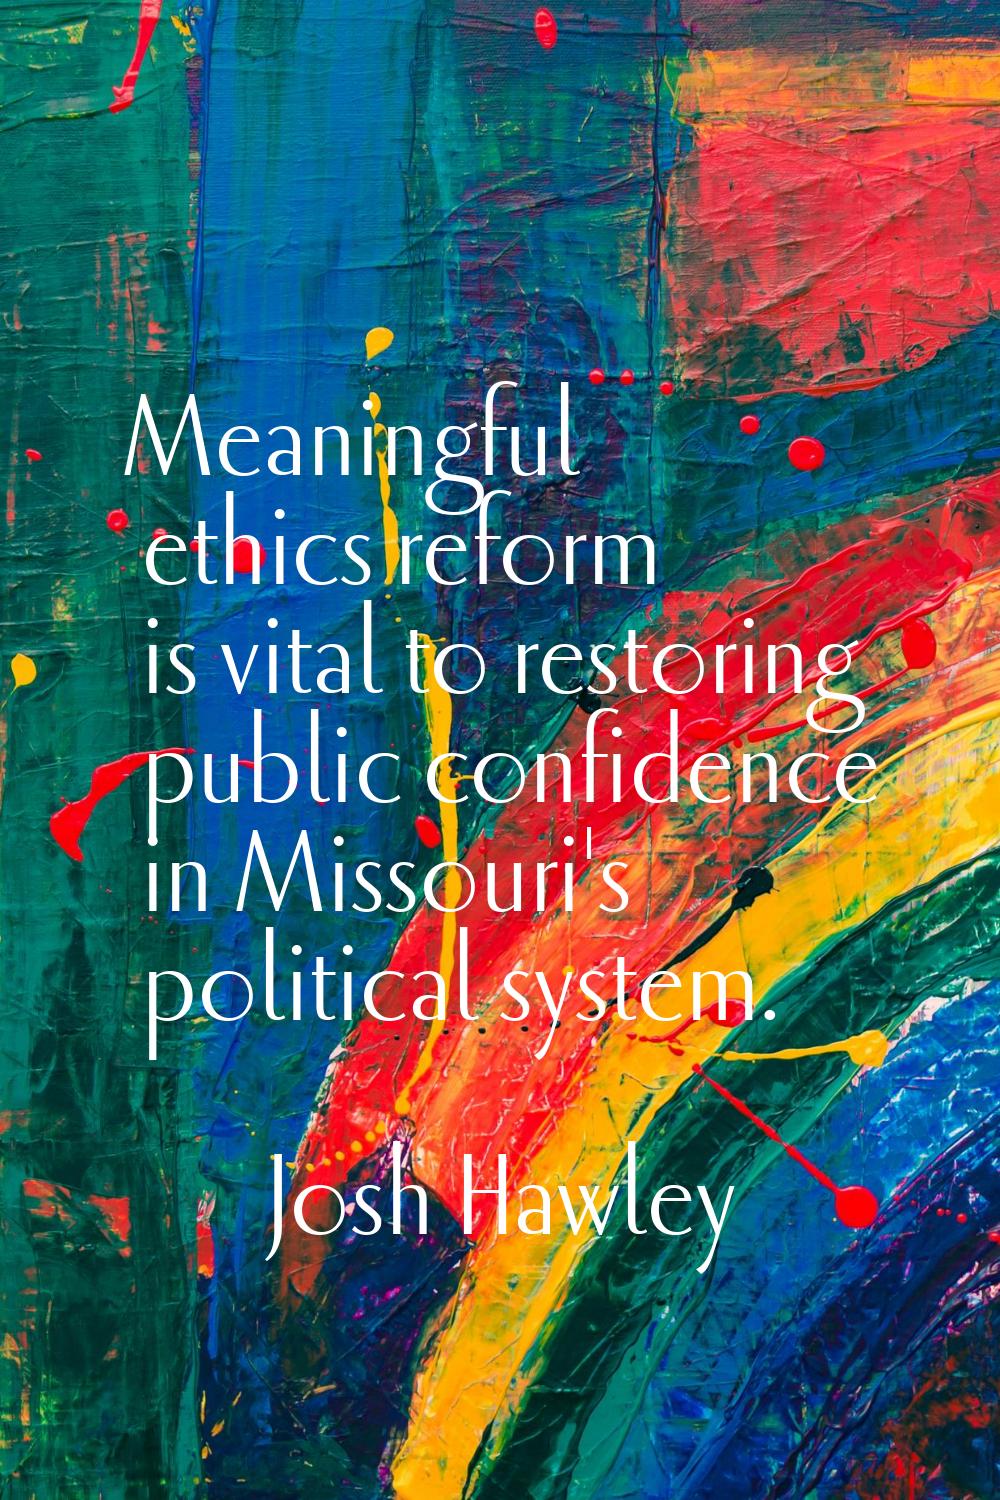 Meaningful ethics reform is vital to restoring public confidence in Missouri's political system.